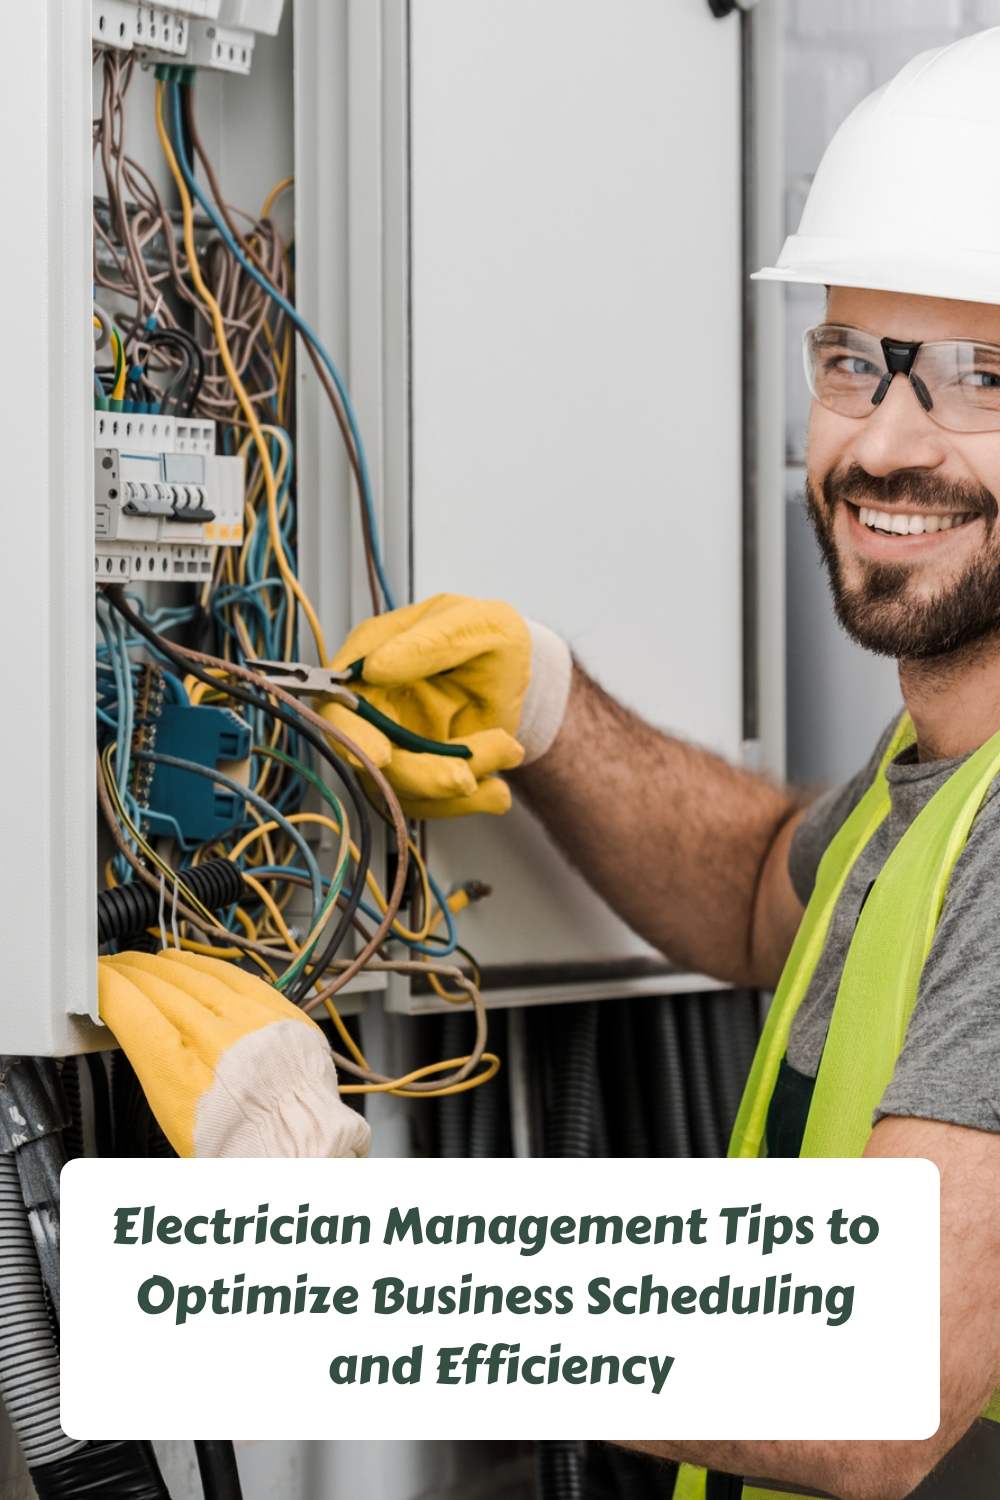 Electrician Management Tips to Optimize Business Scheduling and Efficiency